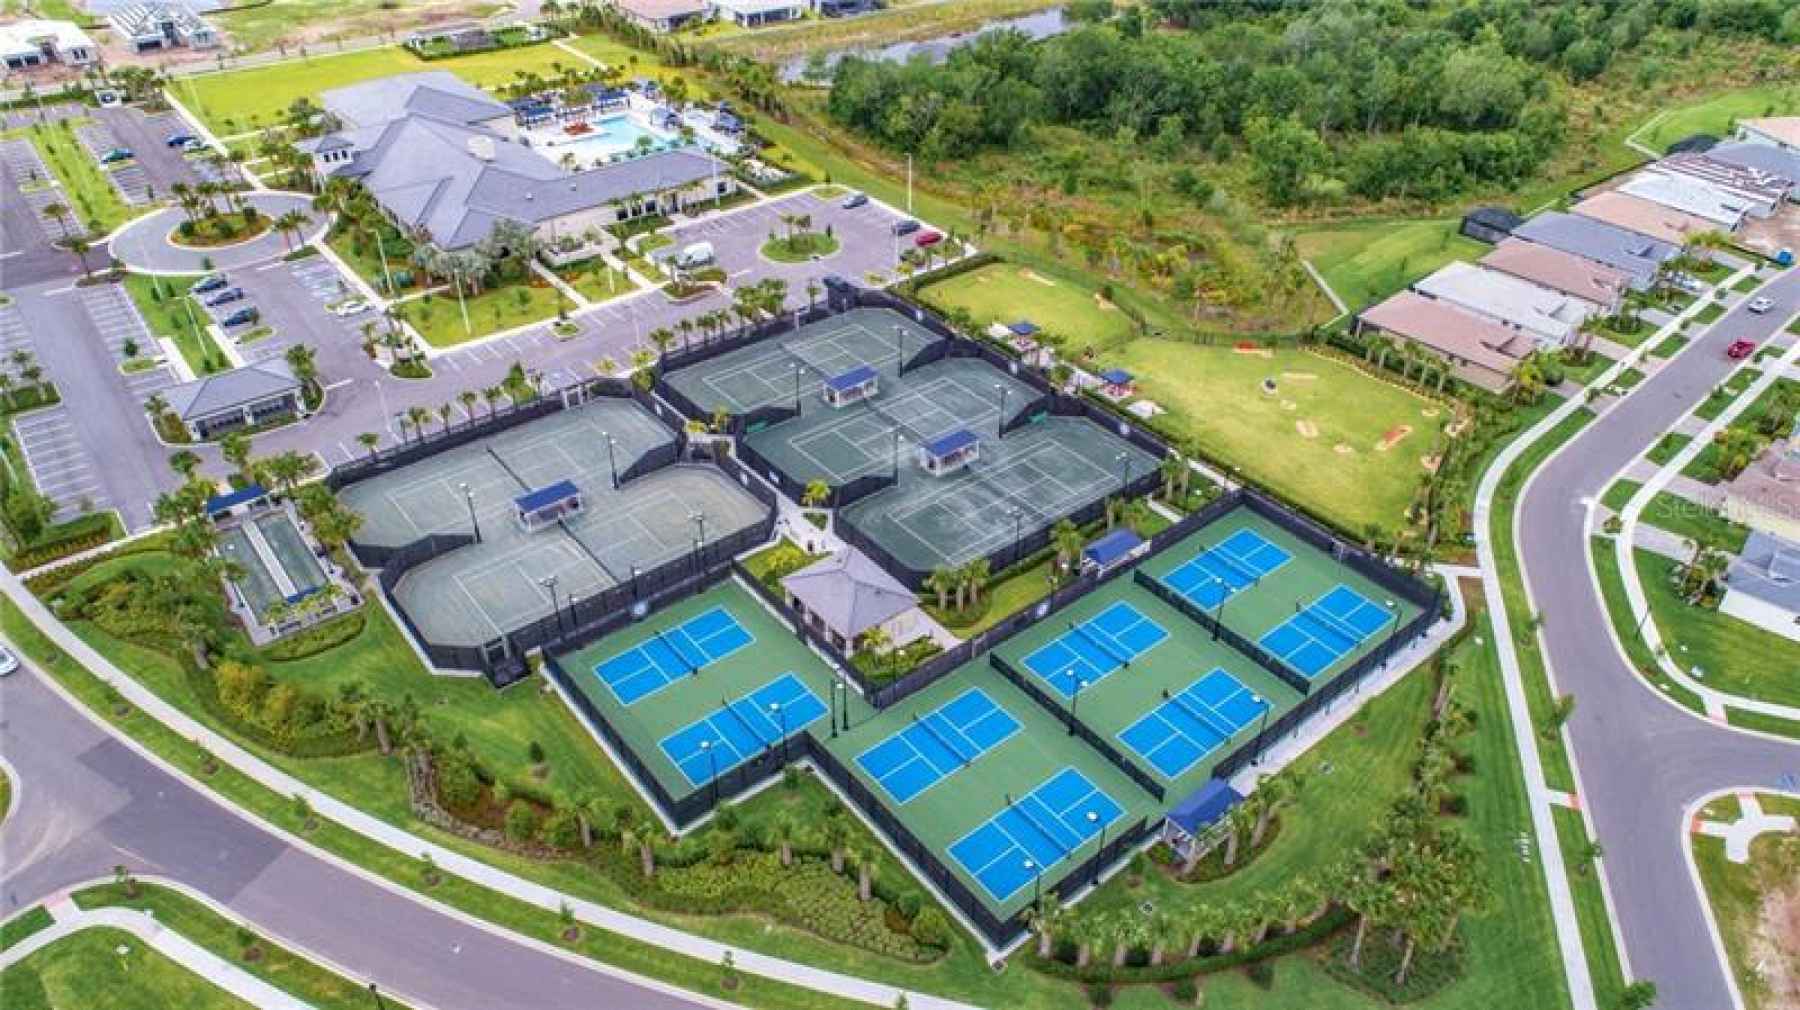 State of the art Tennis, Pickleball and Bocce ball courts.